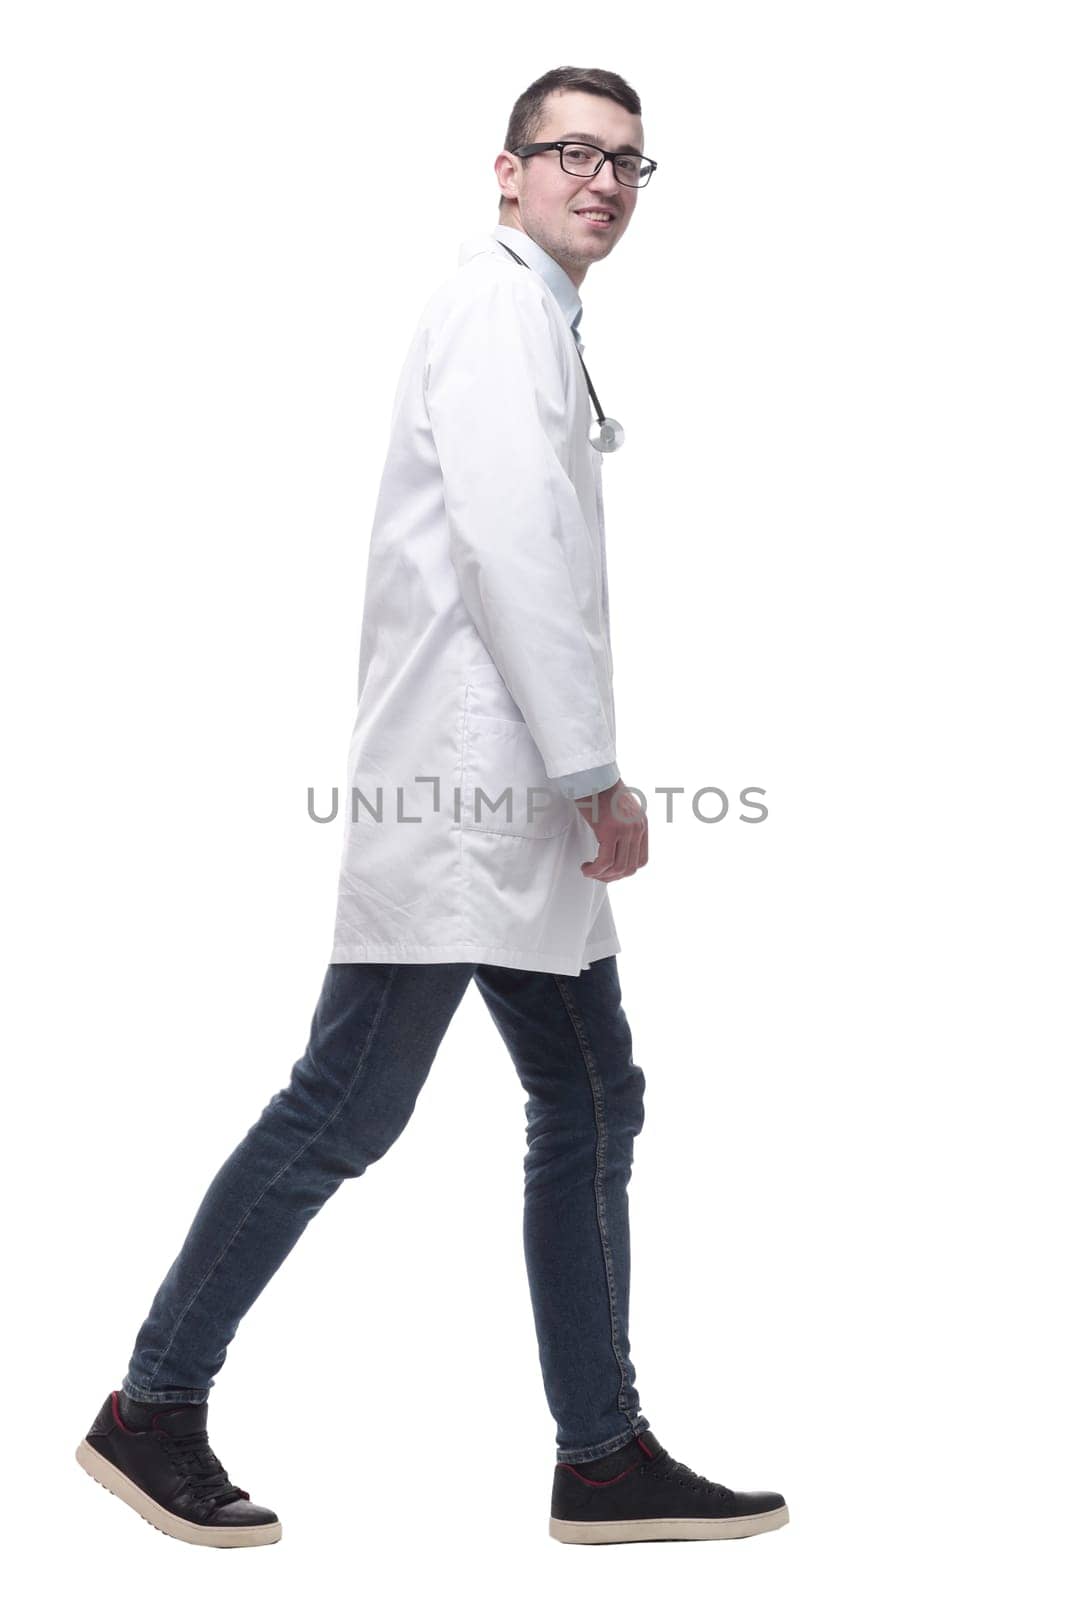 doctor in a white coat striding forward. by asdf